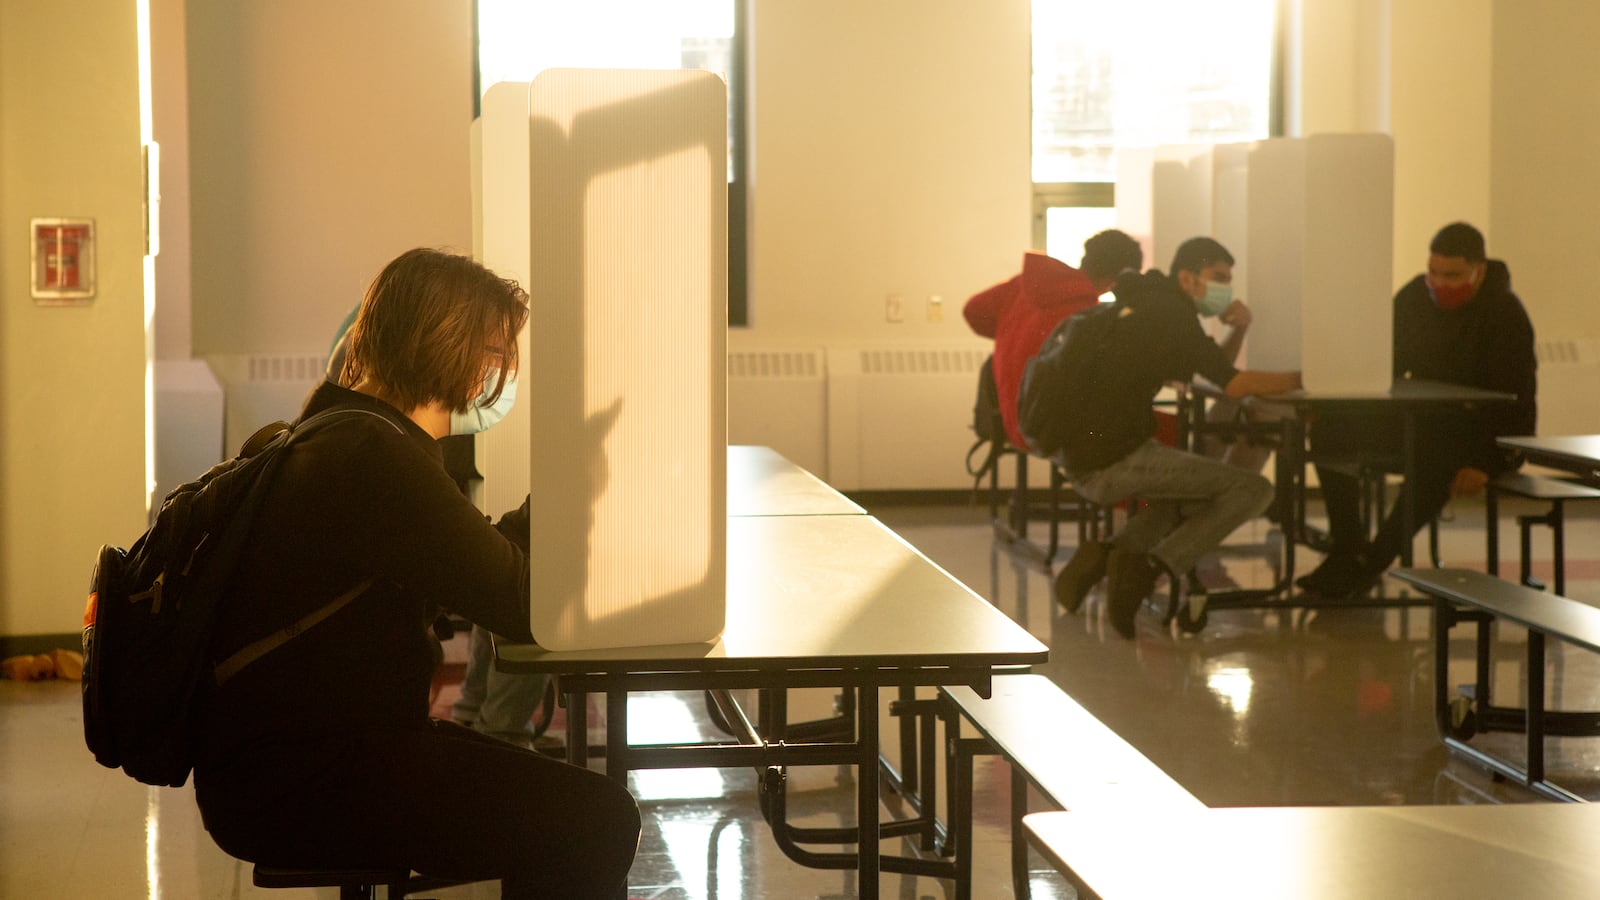 A student wearing a backpack sits on a bench at a table with a trifold partition on top, while three male students in the background also sit at table with partitions.